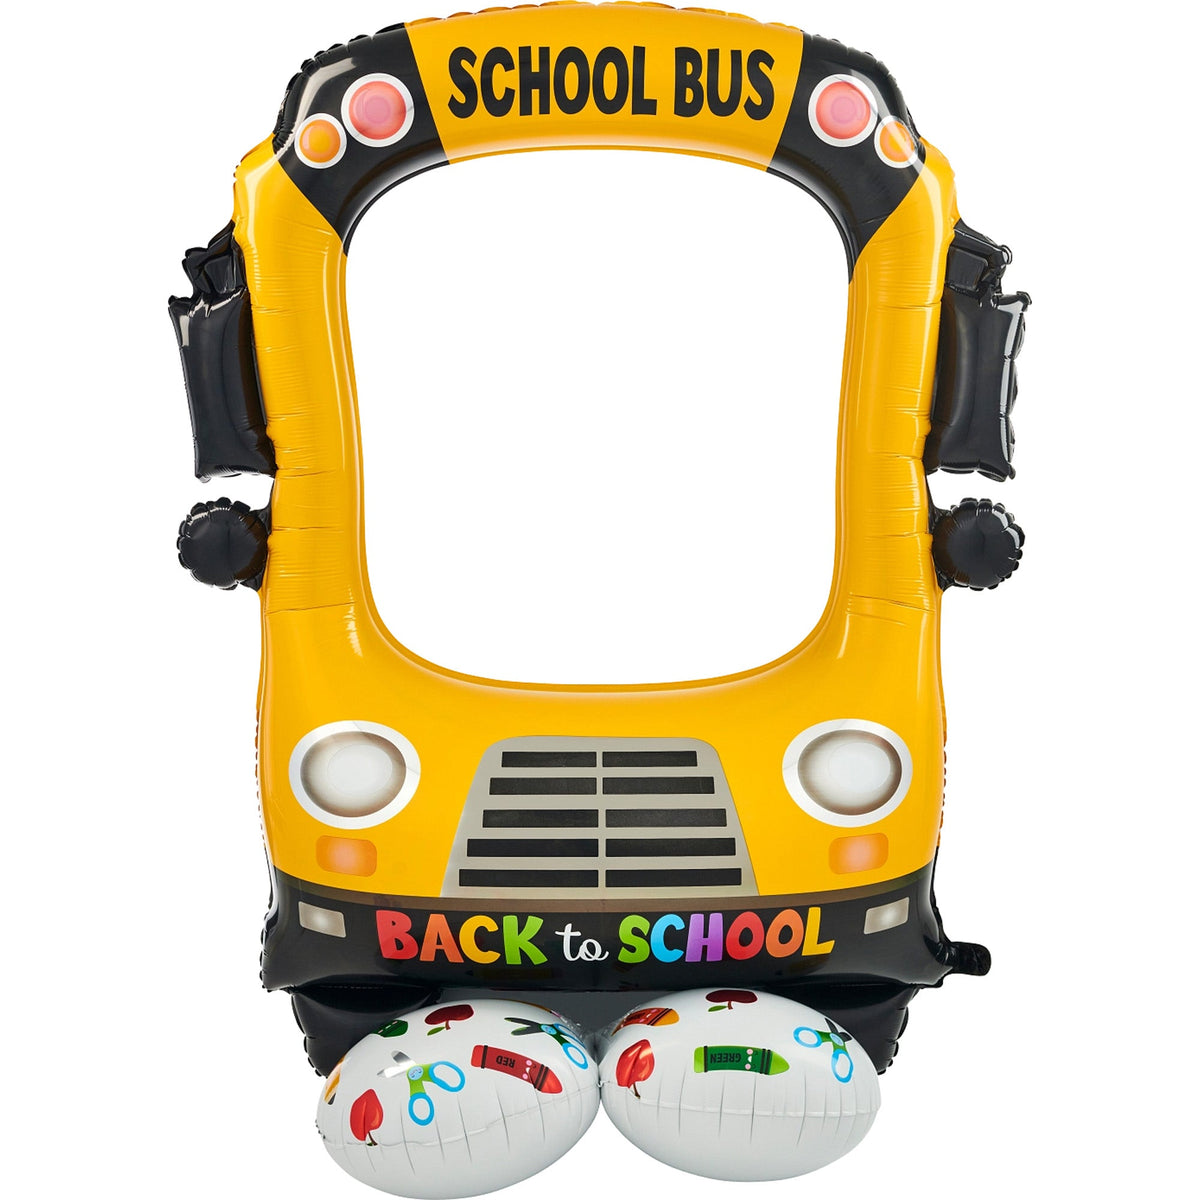 LE GROUPE BLC INTL INC Balloons Back to School School Bus Airloonz Air-Filled Selfie Balloon, 41 x 56 Inches 026635431484